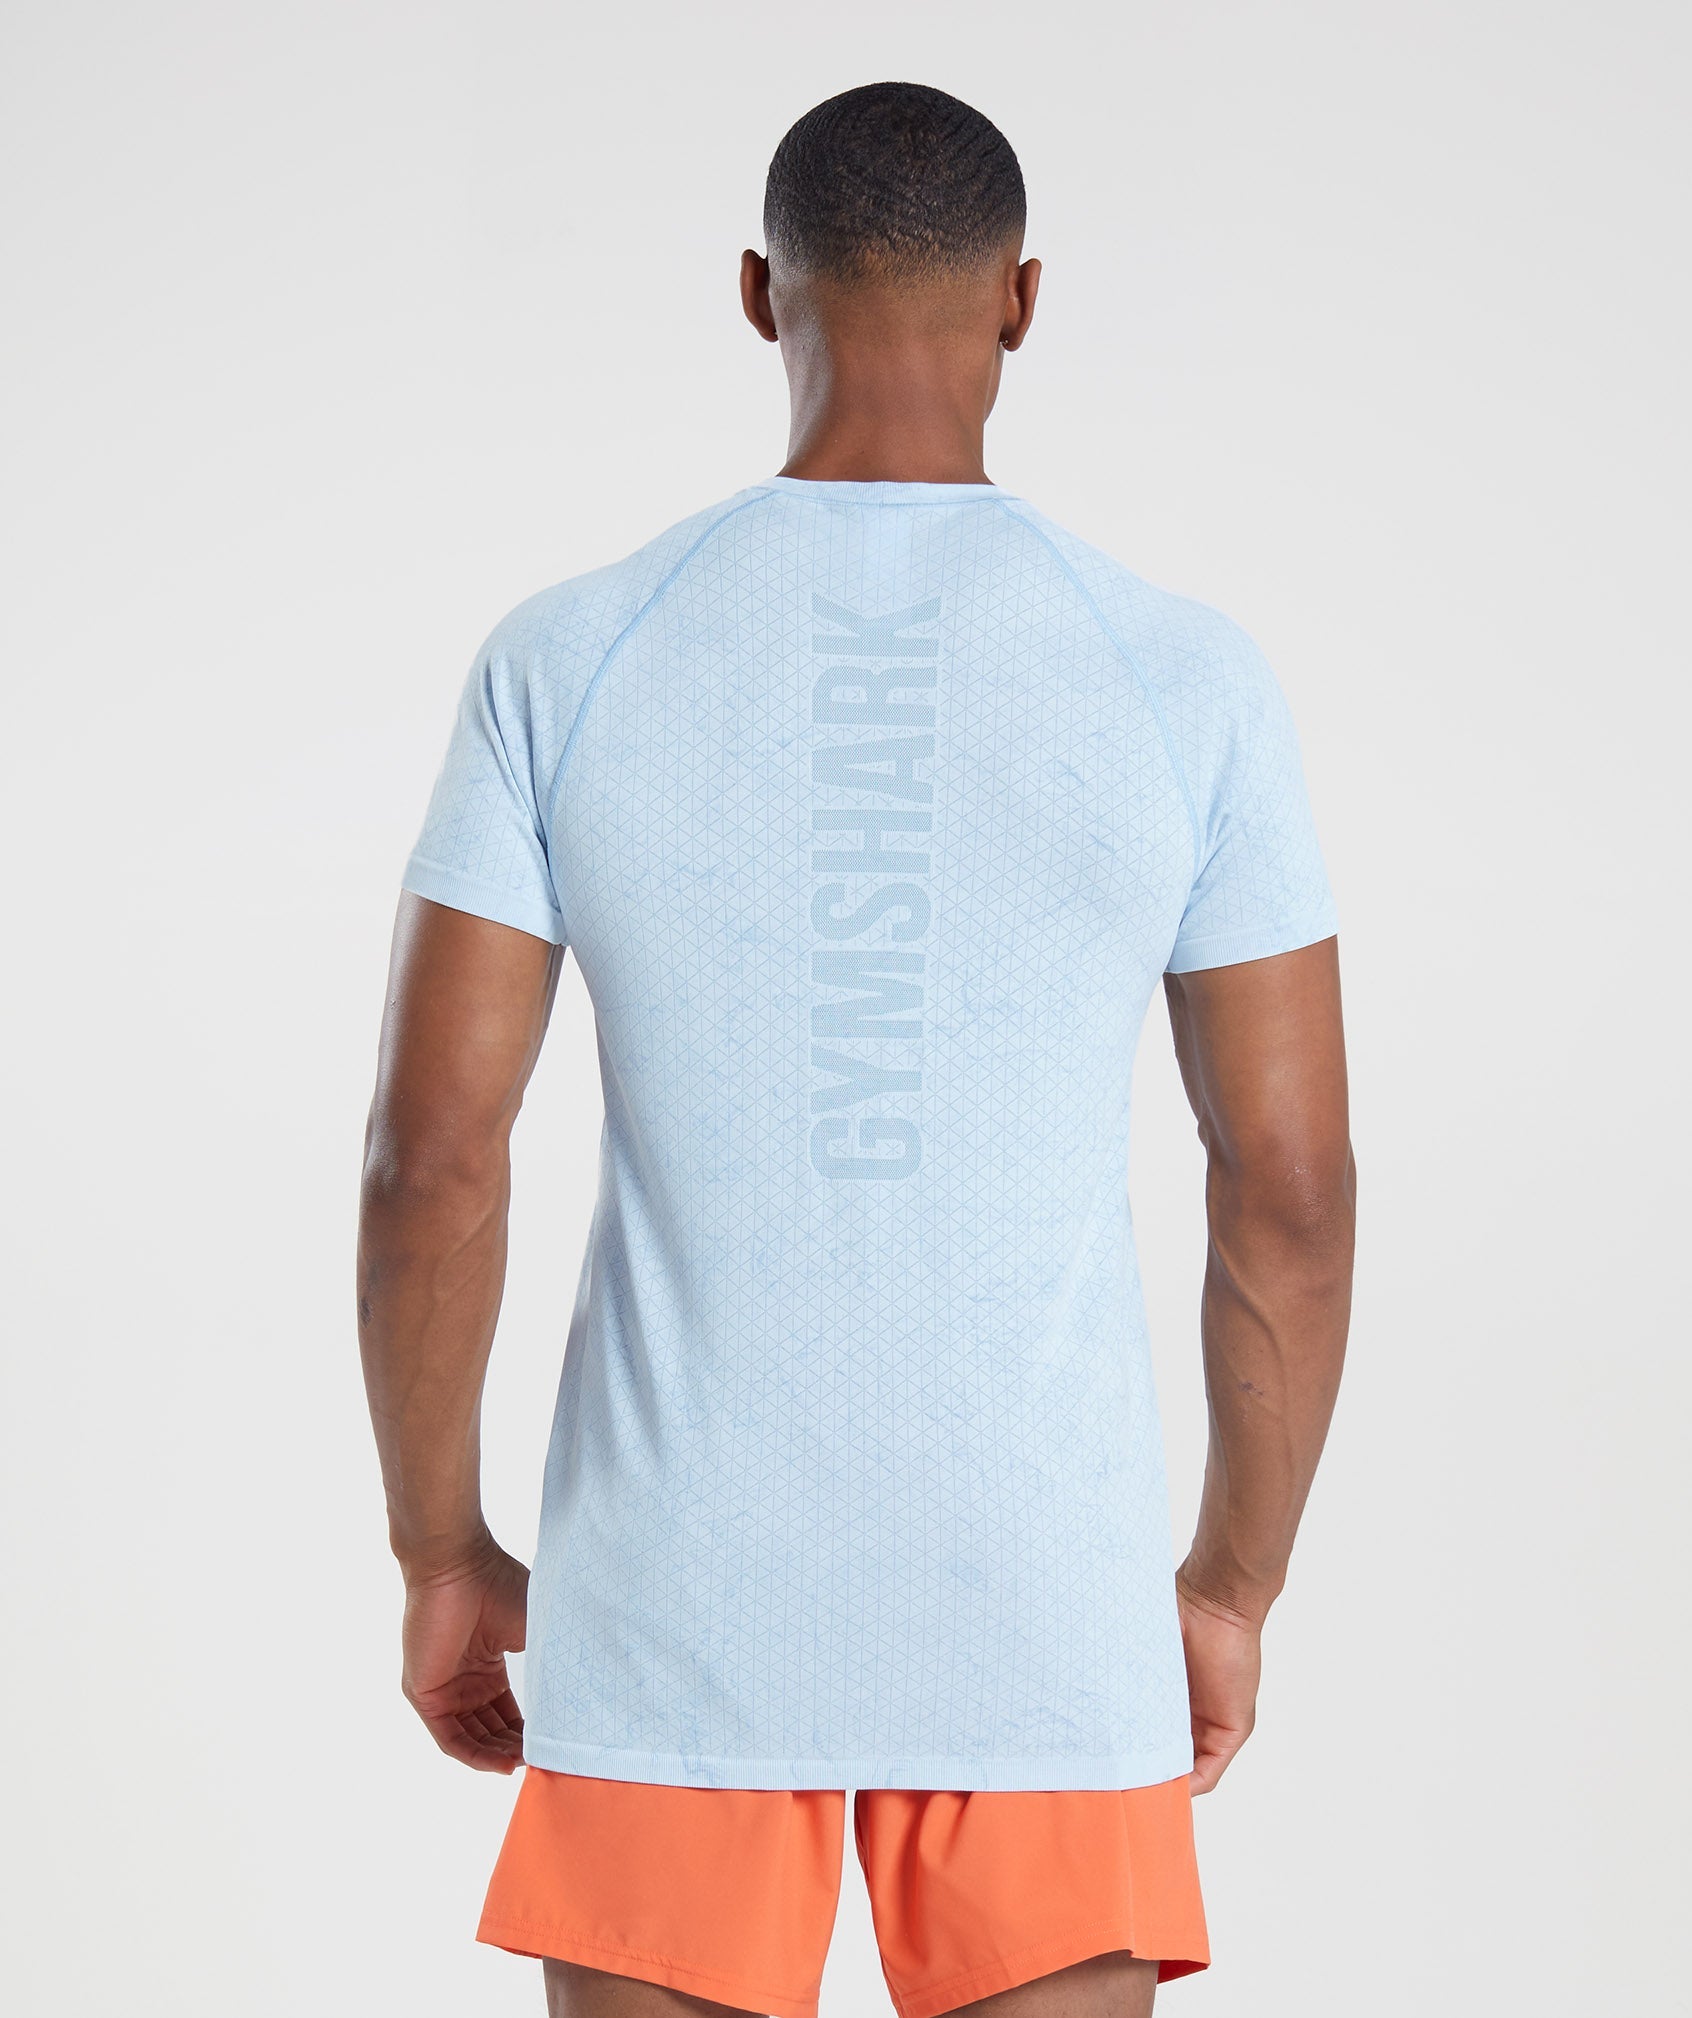 Geo Seamless T-Shirt in White/Moonstone Blue - view 2